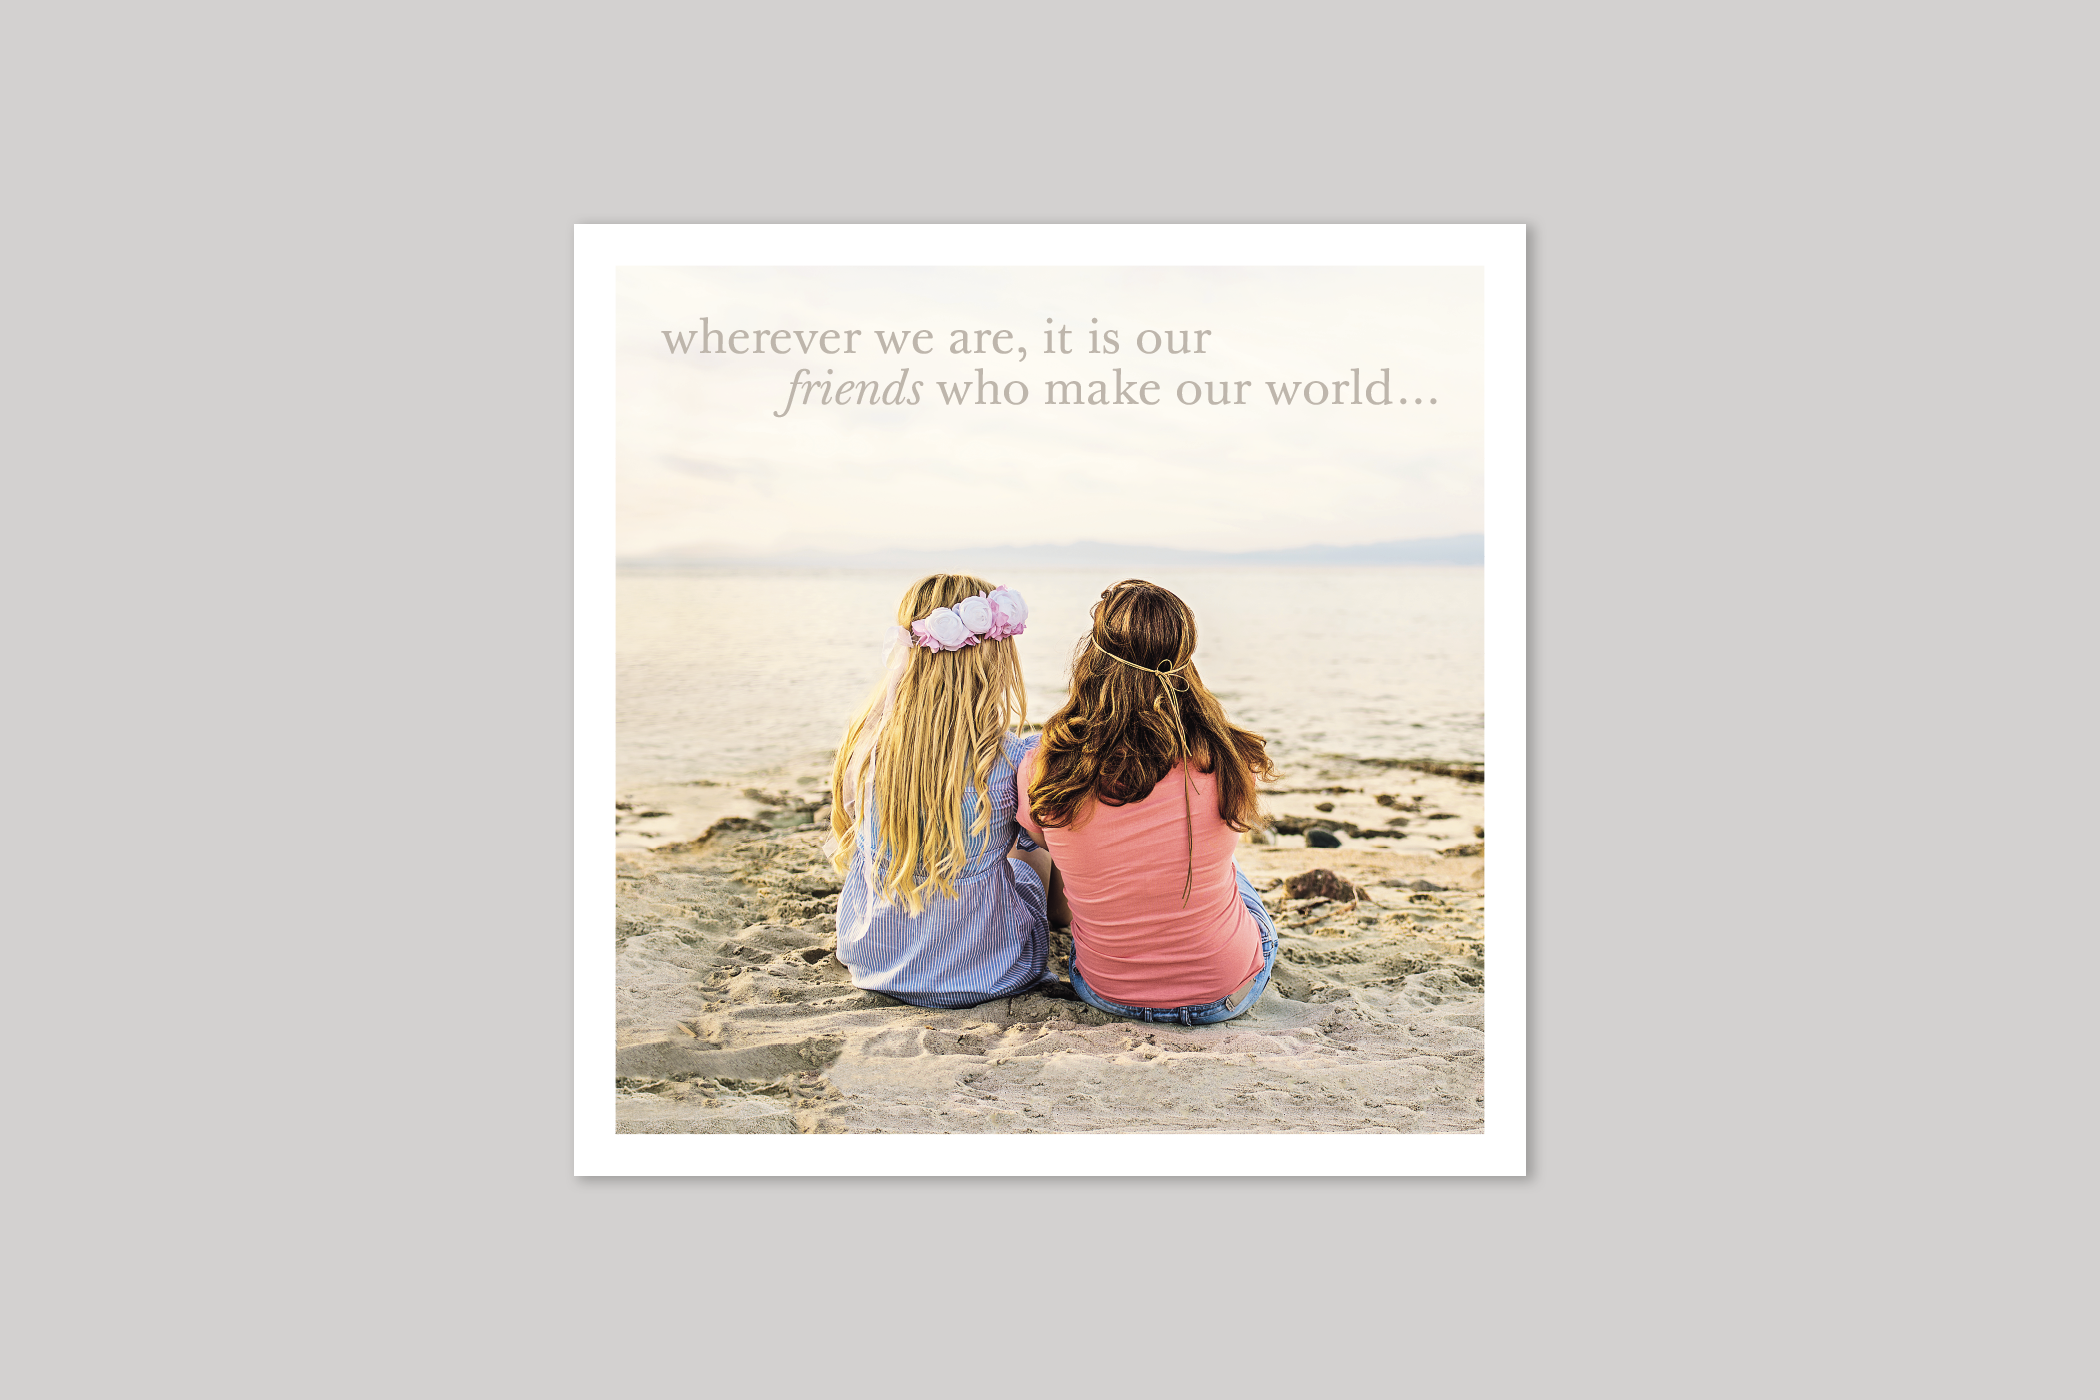 Wherever We Are from Every Picture range of greeting cards  by Icon.